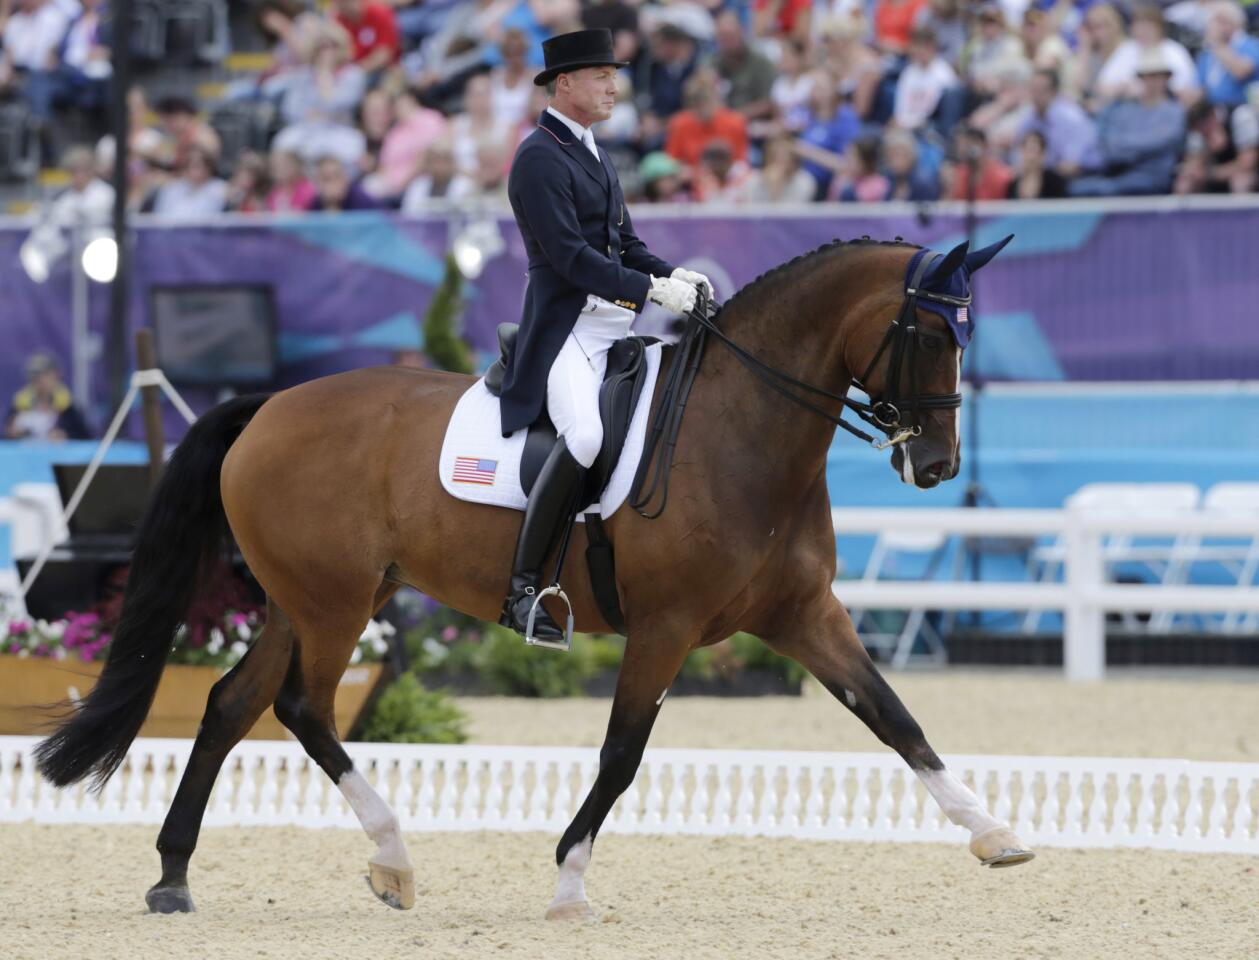 Jan Ebeling of the United States rides Rafalca in the individual grand prix during the equestrian dressage competition at the London Olympics. Ann Romney, wife of U.S. Republic presidential candidate, Mitt Romney, is part-owner of the horse.